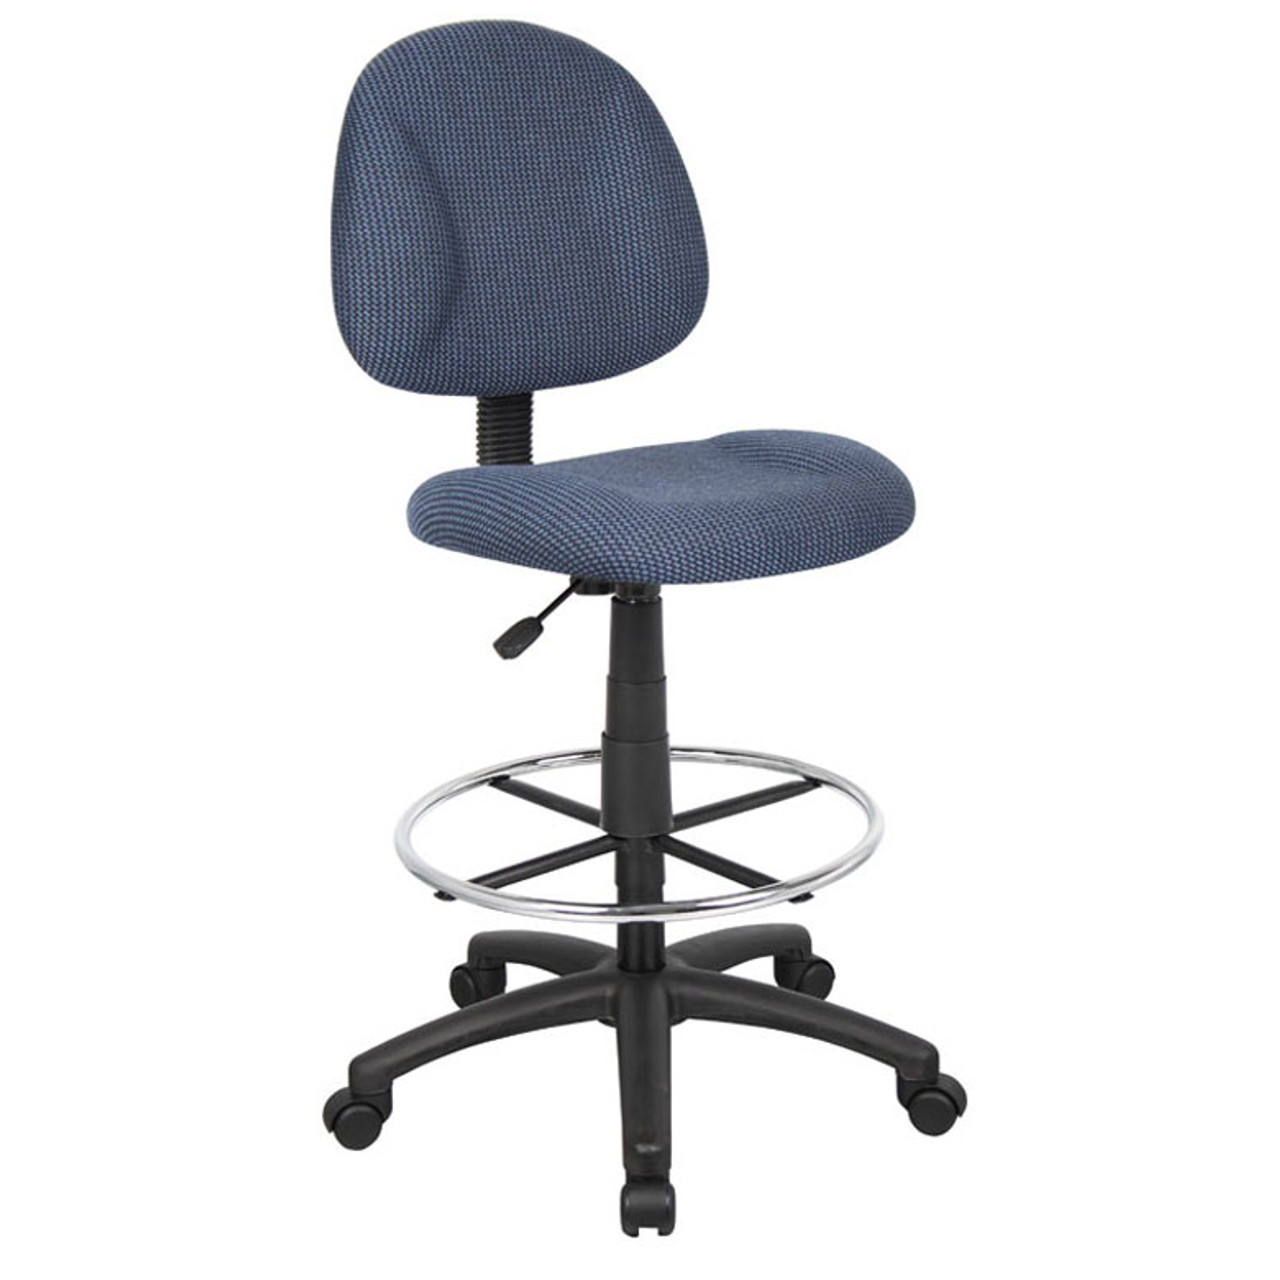 Boss Ergonomic Works Adjustable Drafting Chair with Adjustable